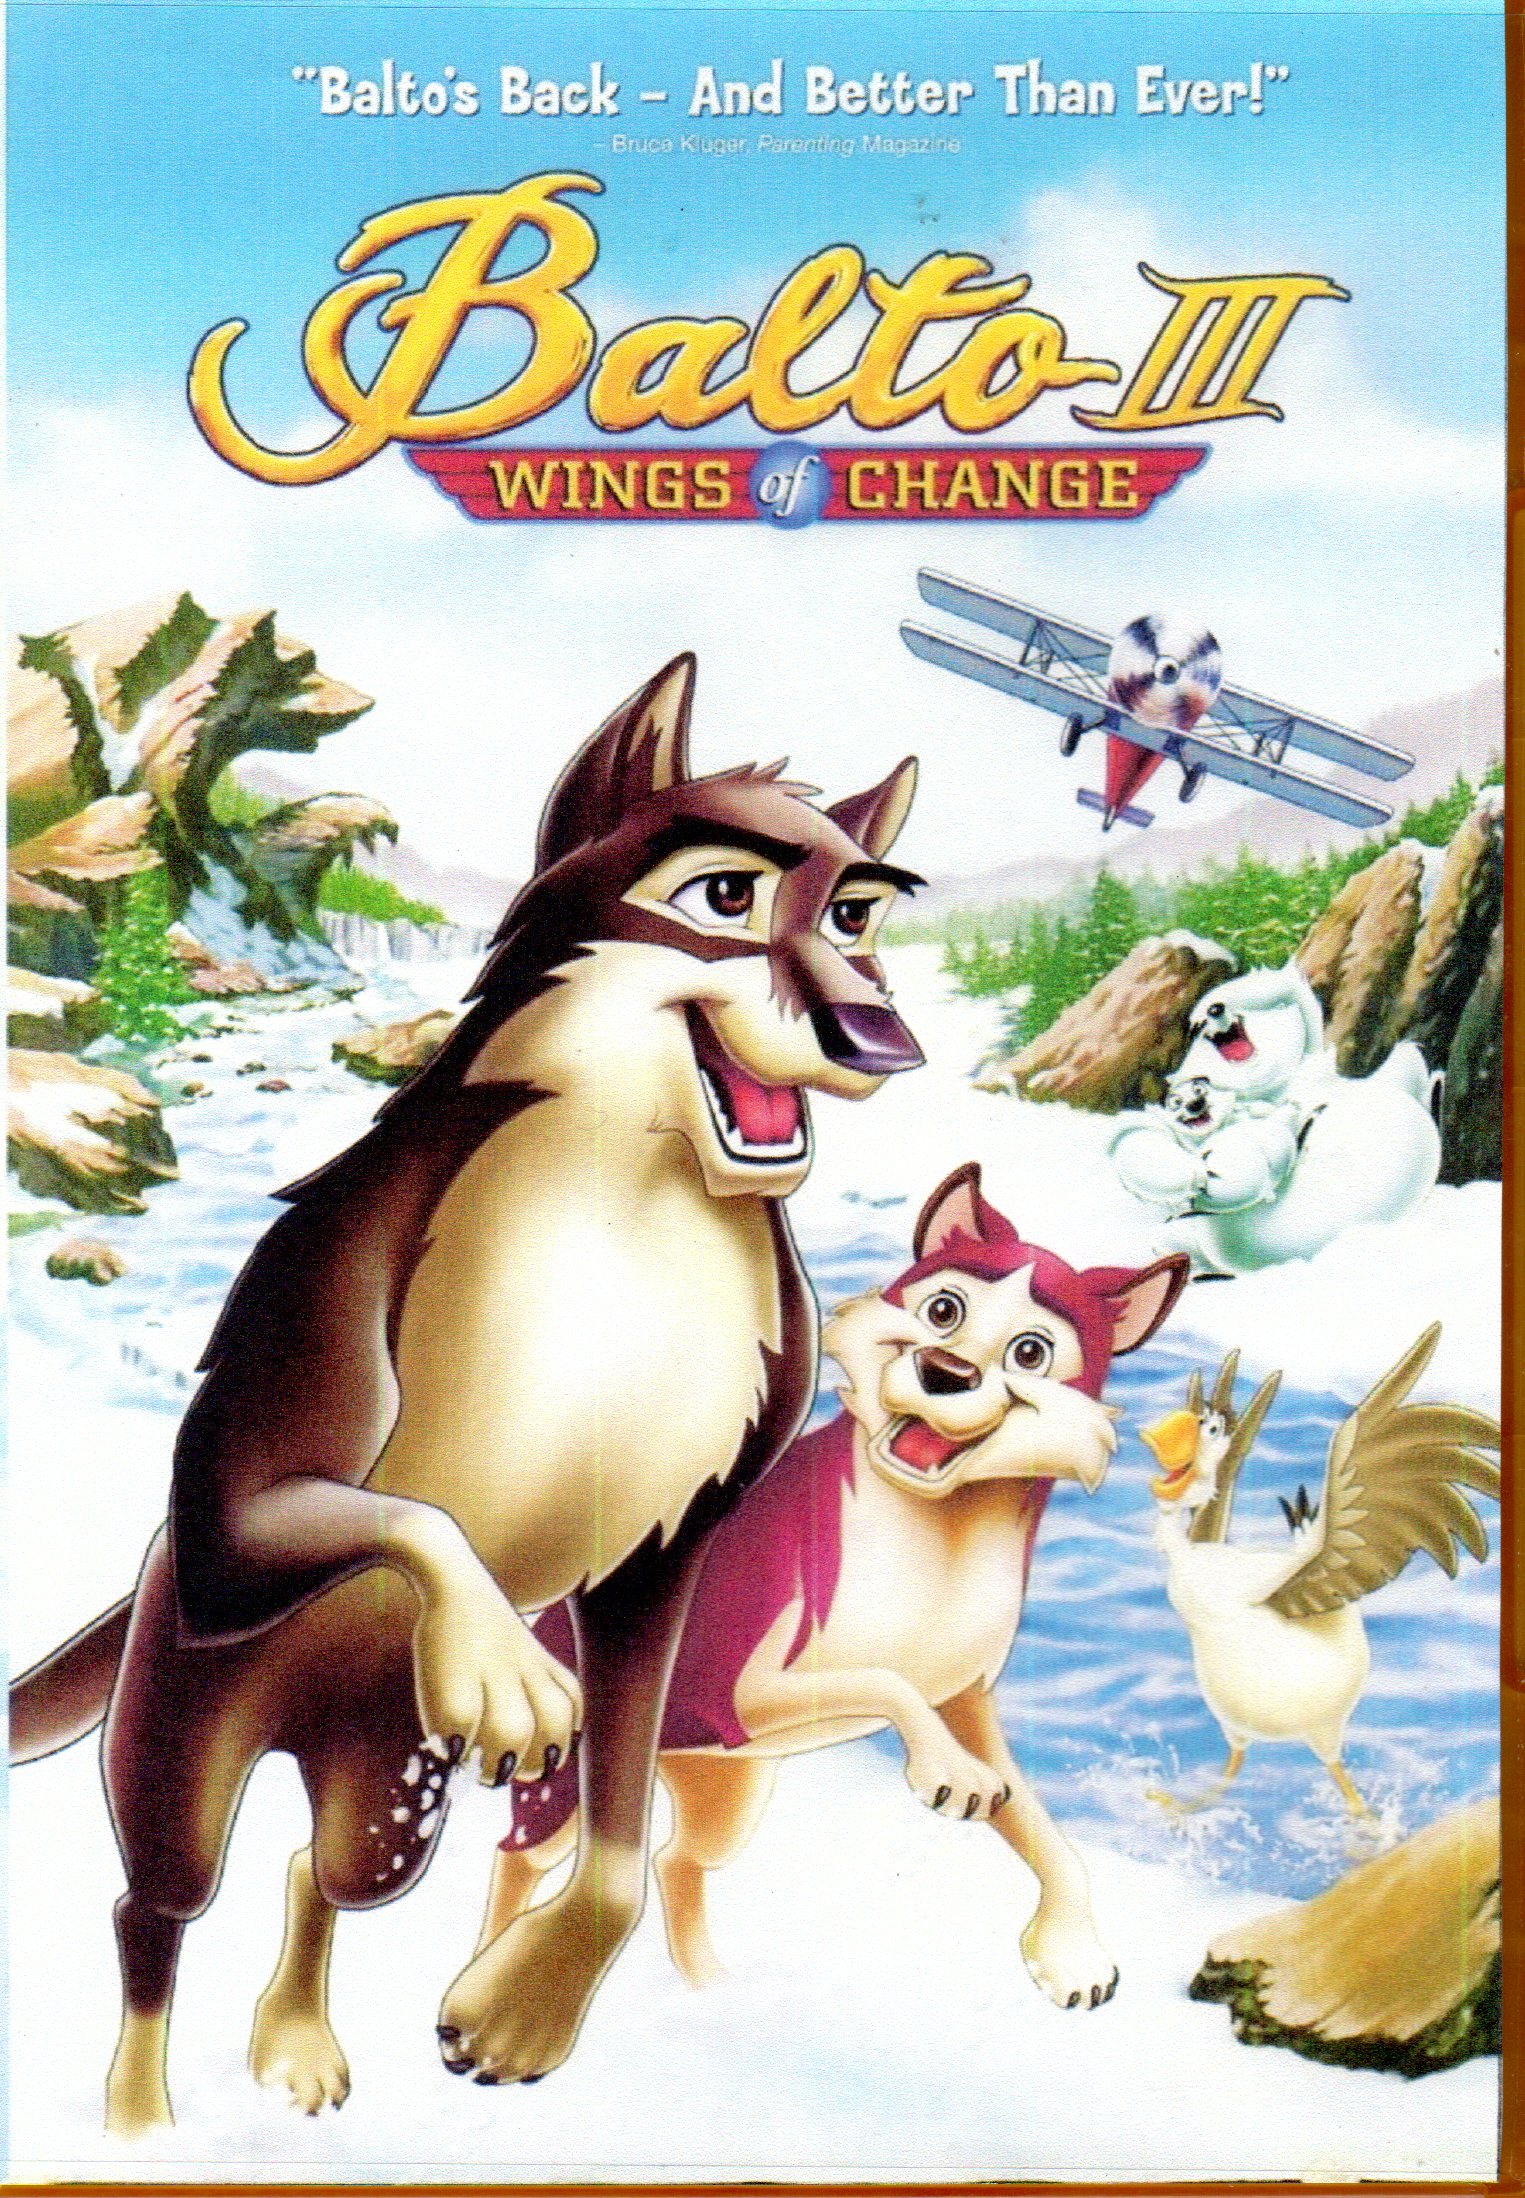 BALTO III: Wings of Change” DVD: (Animated) PRIVATE COLLECTION. * 2 ITEMS  MINIMUM FOR INTERNATIONAL ORDERS FROM USA. ONLY $ FEE PER ADDITIONAL  ITEM SHIPPED. – Norberto Perdomo